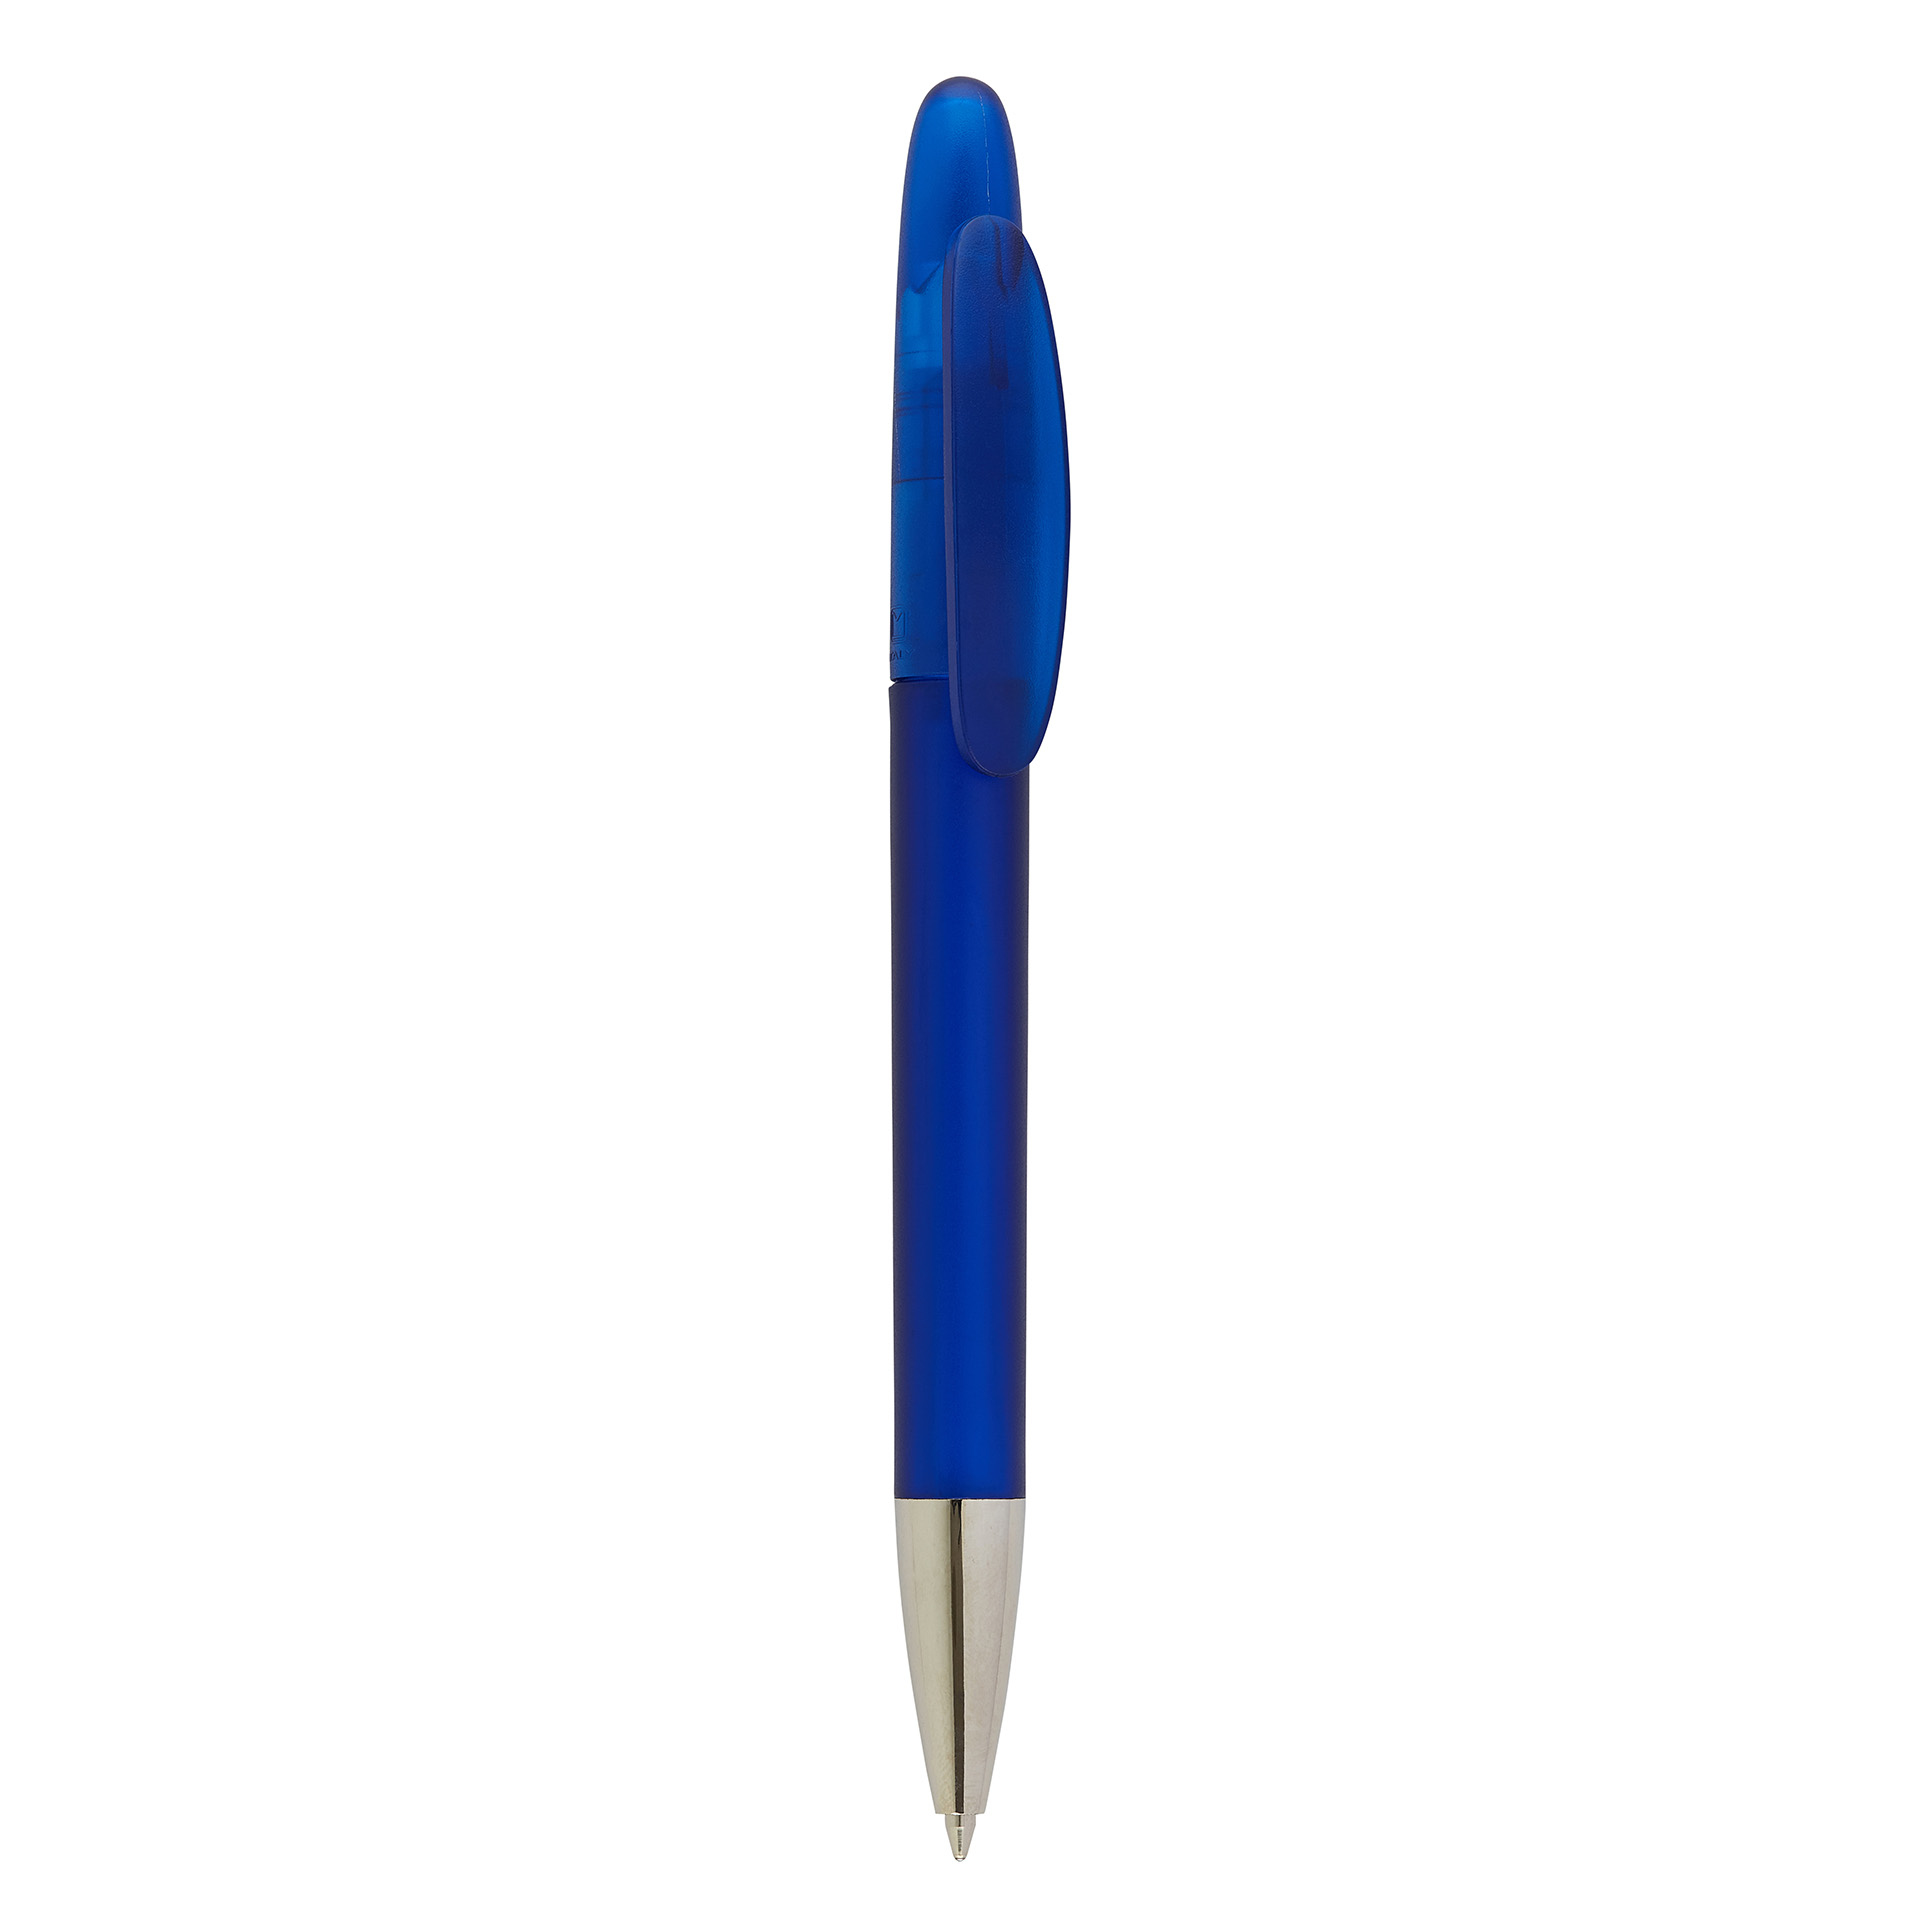 Hudson Biodegradable Frosted Pen  in blue